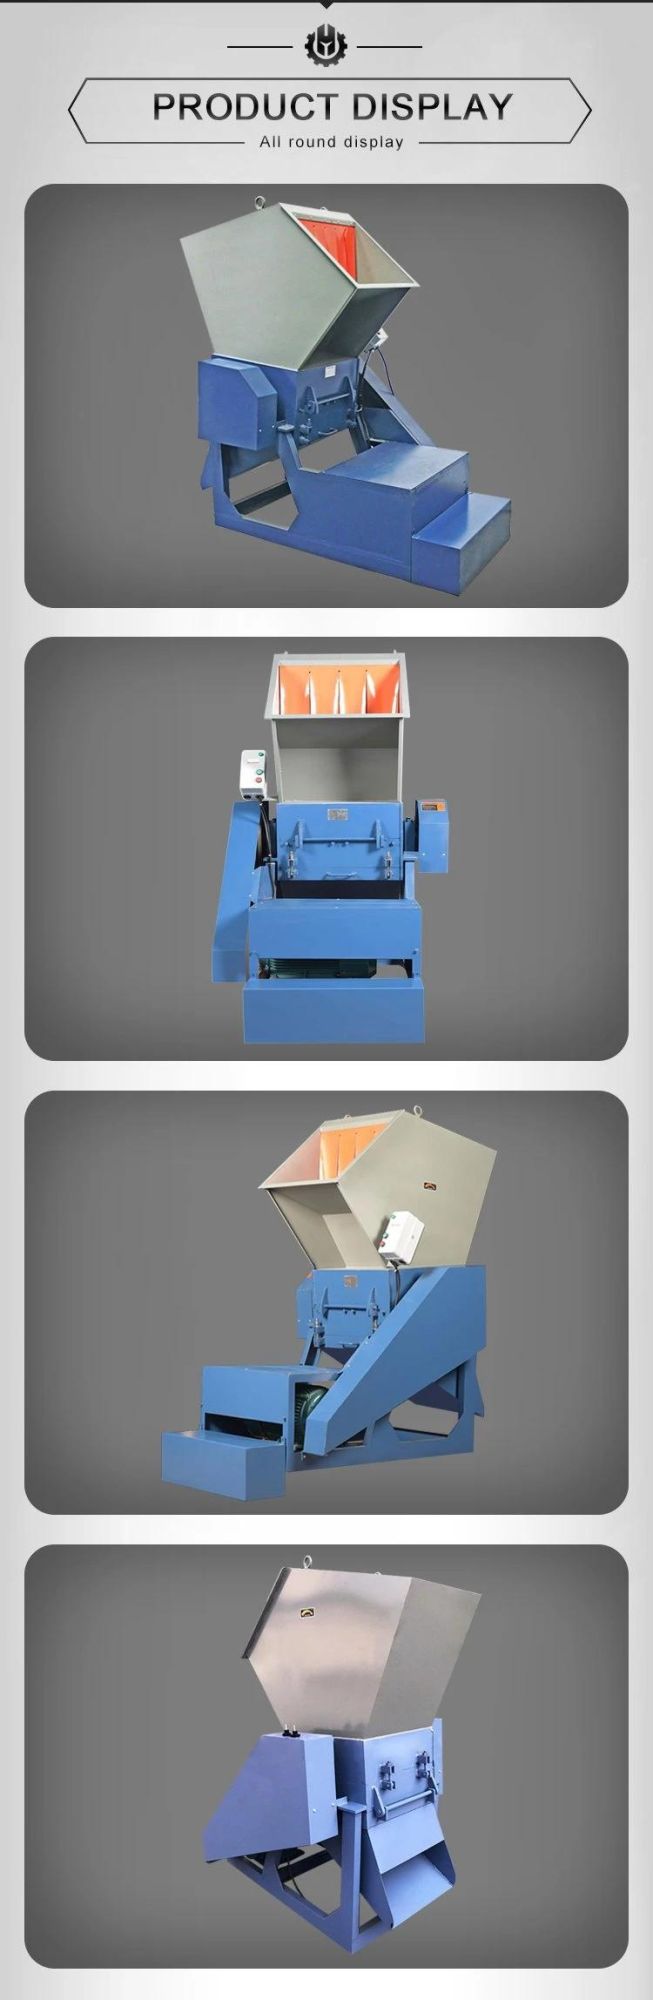 Hollow Crusher Machine for Waste Plastic Recycling and Crushing Multi-Functional Plastic Machinery